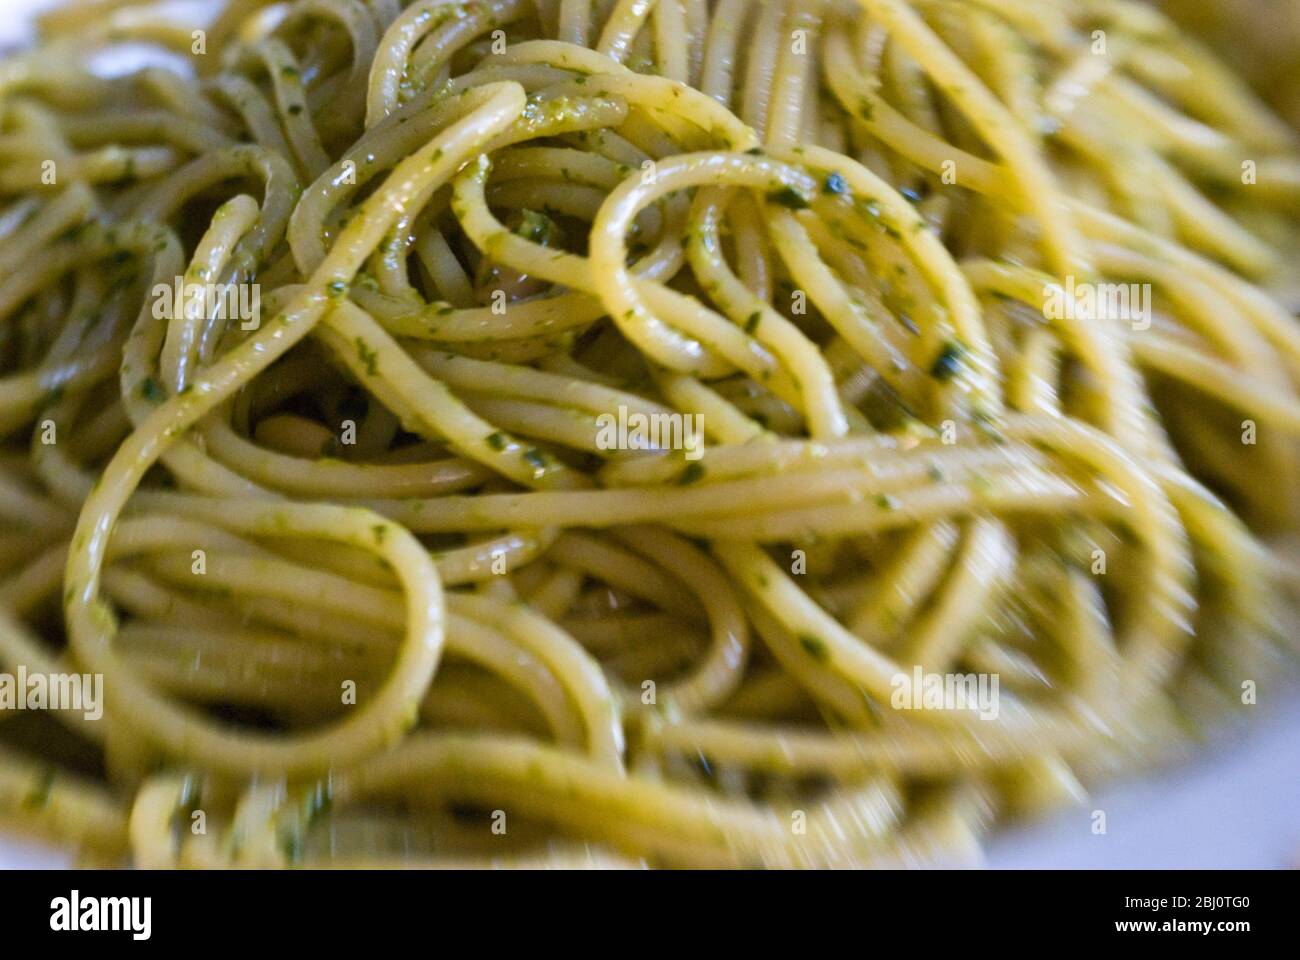 Plate of spaghetti with 'pesto' made of coriander and chill with pine nuts. Shot with Lensbaby lens for blurred effect. - Stock Photo